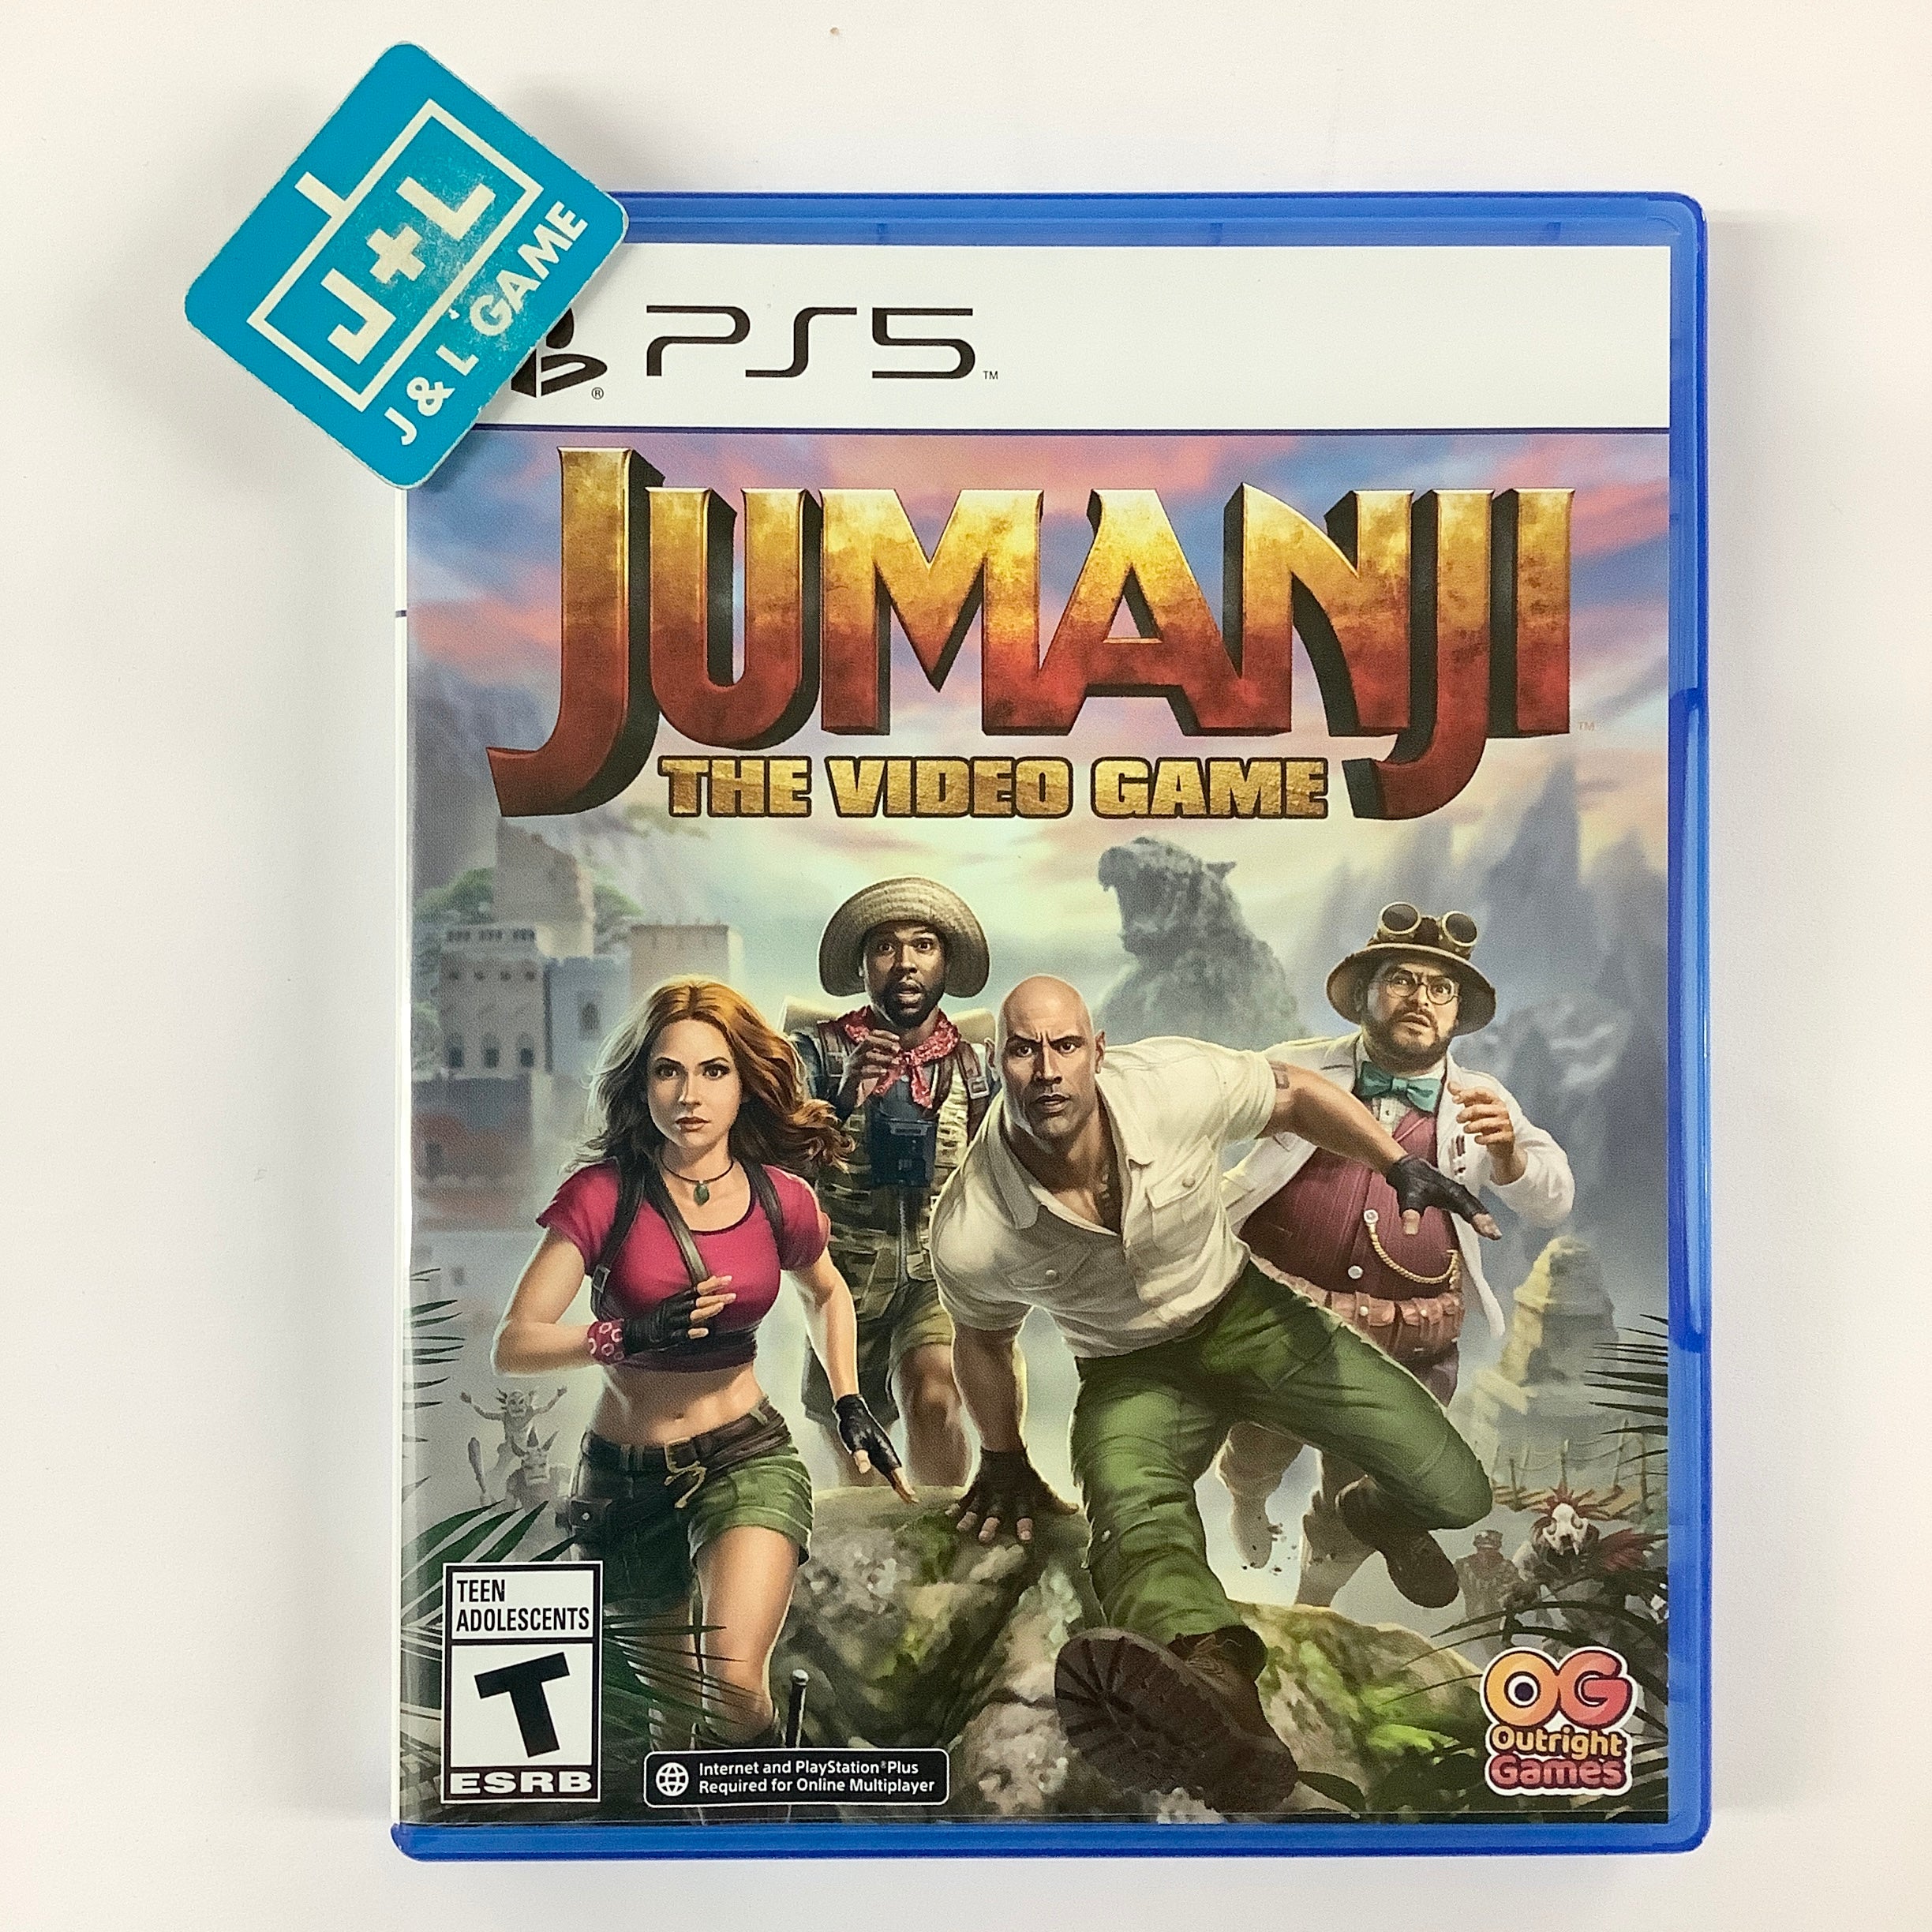 Jumanji: The Video Game - (PS5) PlayStation 5 [UNBOXING] Video Games Outright Games   